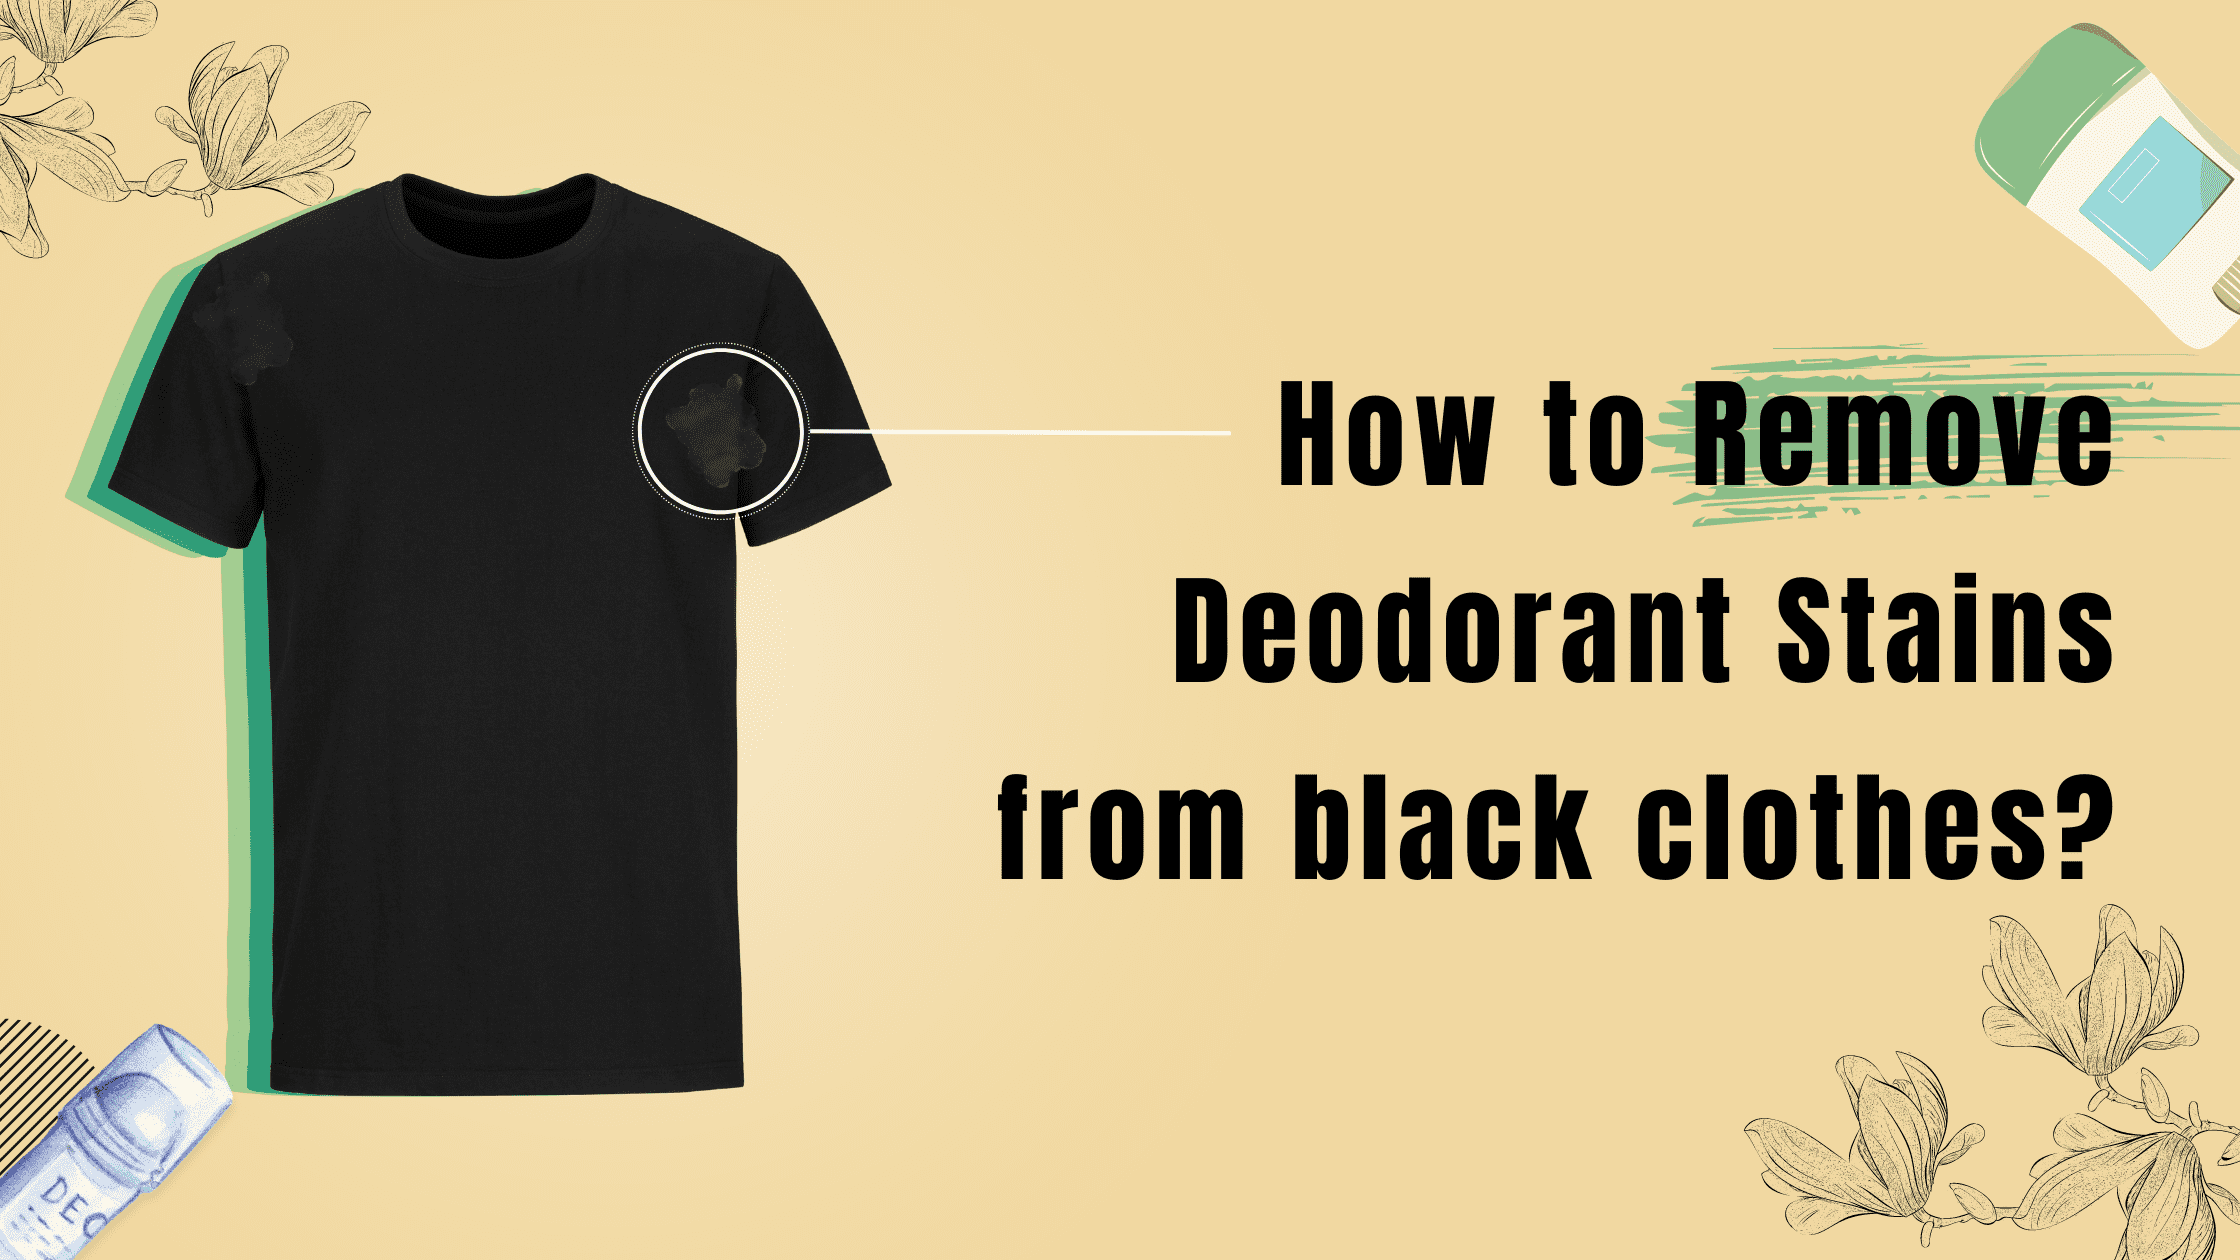 How to Remove Deodorant Stains From Black Clothes?